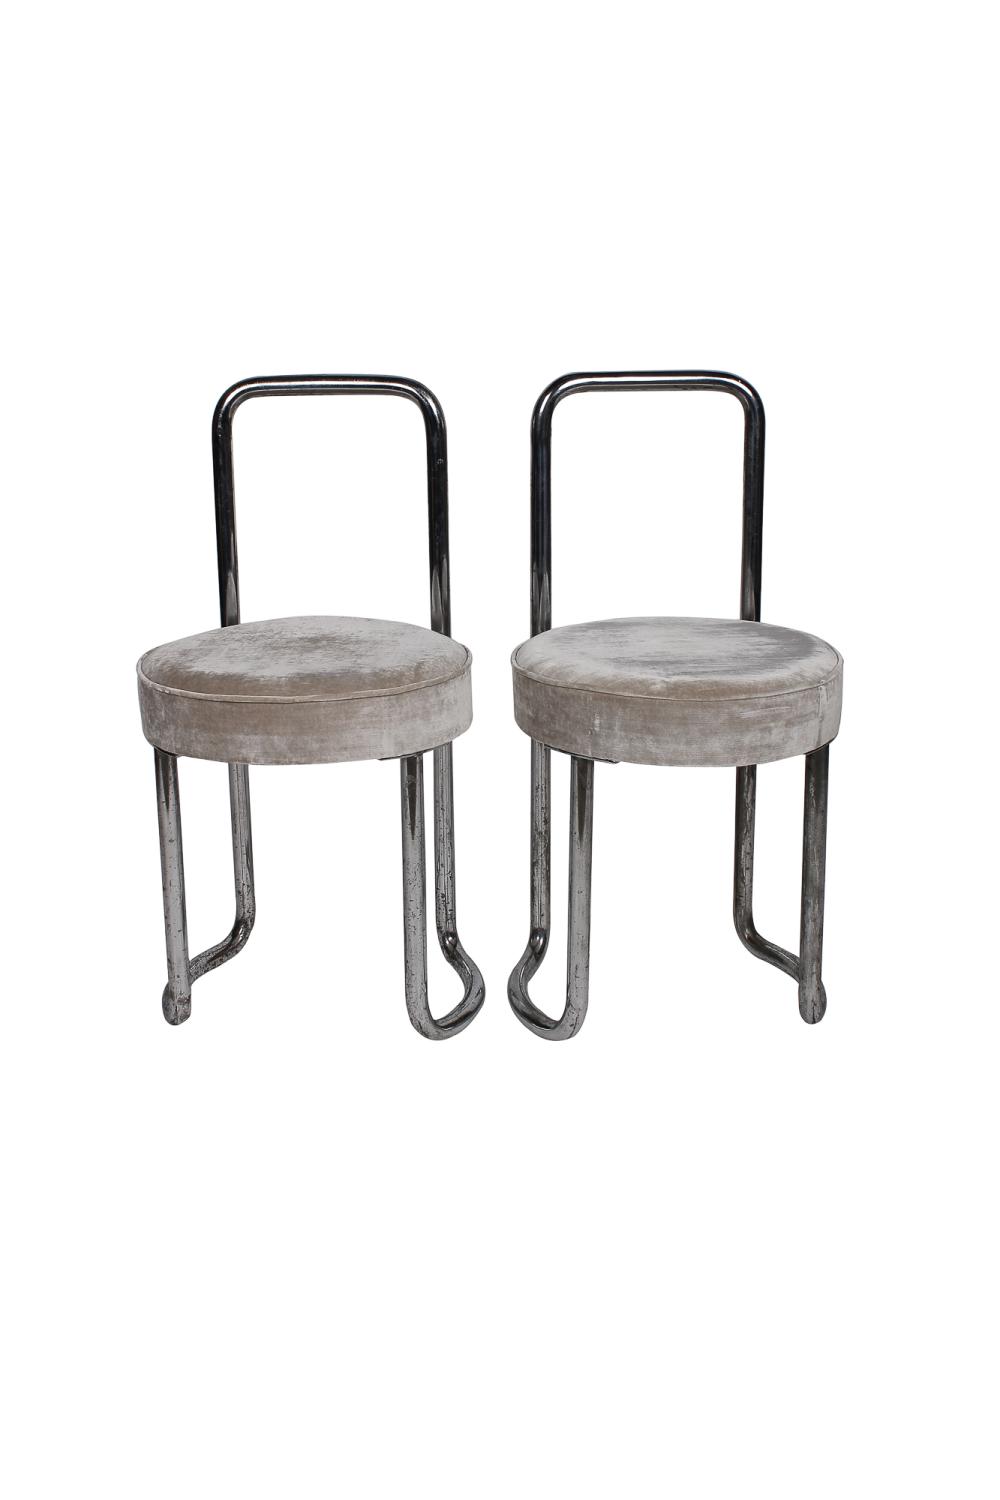 PAIR OF DECO STYLE CHROMED METAL 33642a